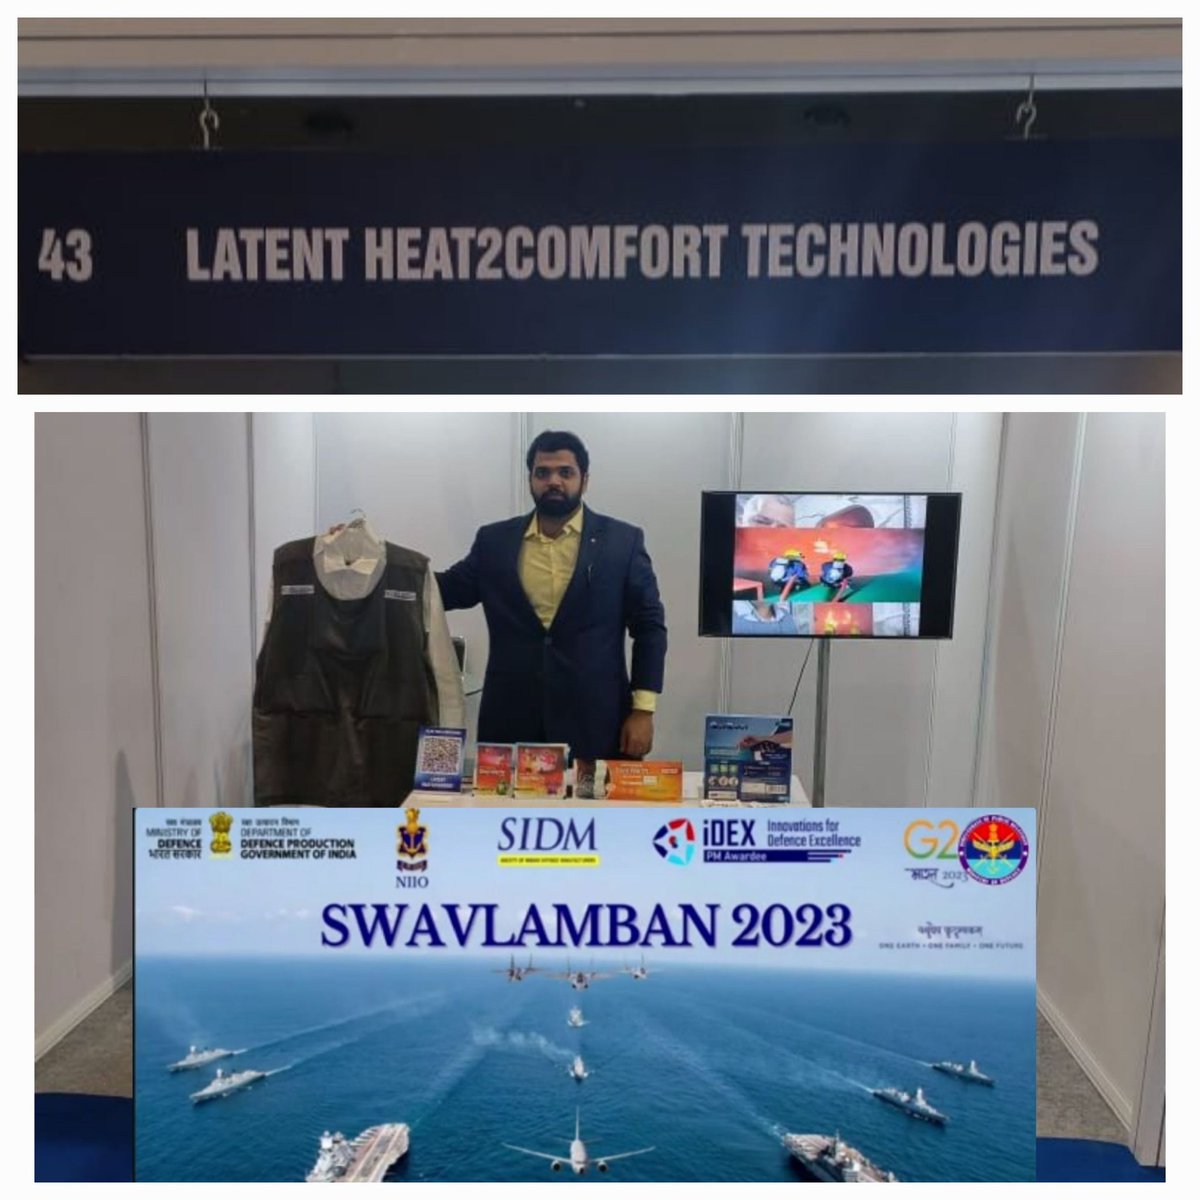 Proud Moment to present #InstantColdVest for fire fighters &, #StayWarm portfolio at #Swavlamban2023. We realized the vision of @Arun_Golaya sir his unwavering support to @India_iDEX #Sprint Winners is inspiring 🙏 @indiannavy @NorthernComd_IA @CaptDKS @Heat2Comfort #makeinindia